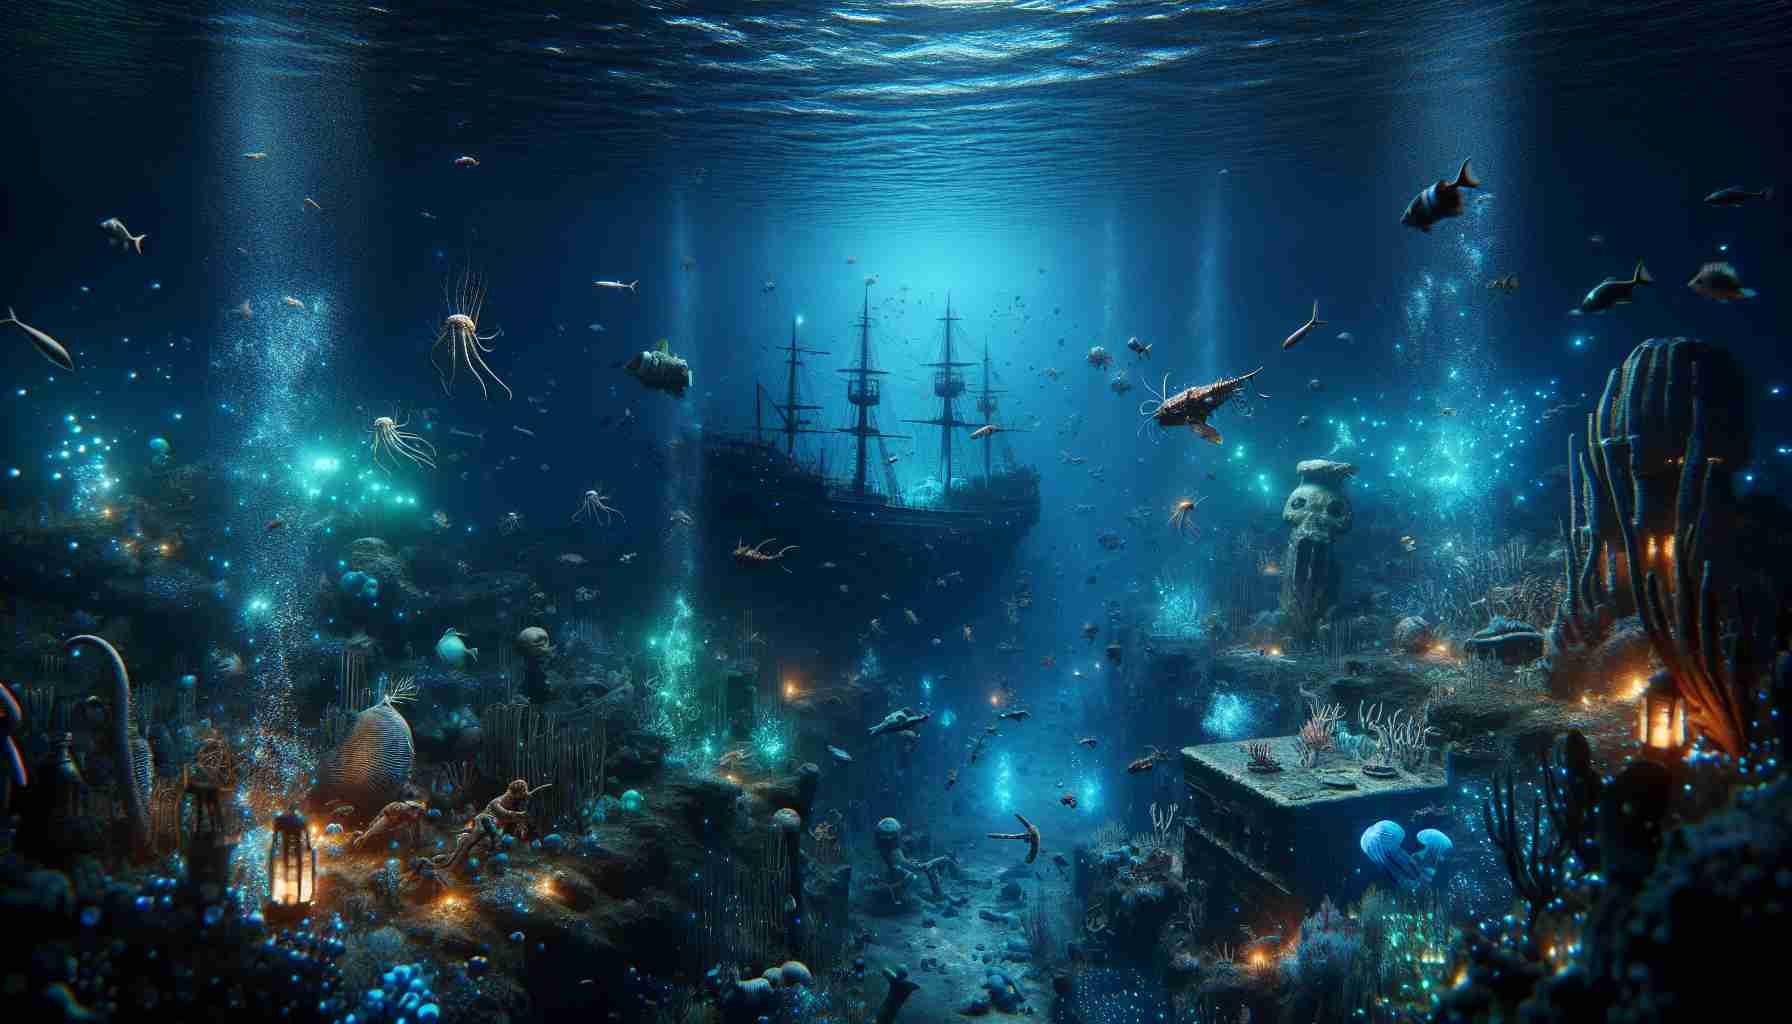 An ultra high definition, realistic image showcasing the mysteries of the deep sea. The ocean depth is illuminated, revealing intriguing artifacts from human history, such as a shipwreck and submerged ancient ruins. Bizarre and exquisite marine creatures of various shapes, sizes, and colors swim through the shadowy waters while bioluminescent plants and organisms add a mystical ambiance to the scene. The overall image is an engaging exploration of the ocean's hidden depths, demonstrating the untapped wealth of secrets waiting to be discovered.